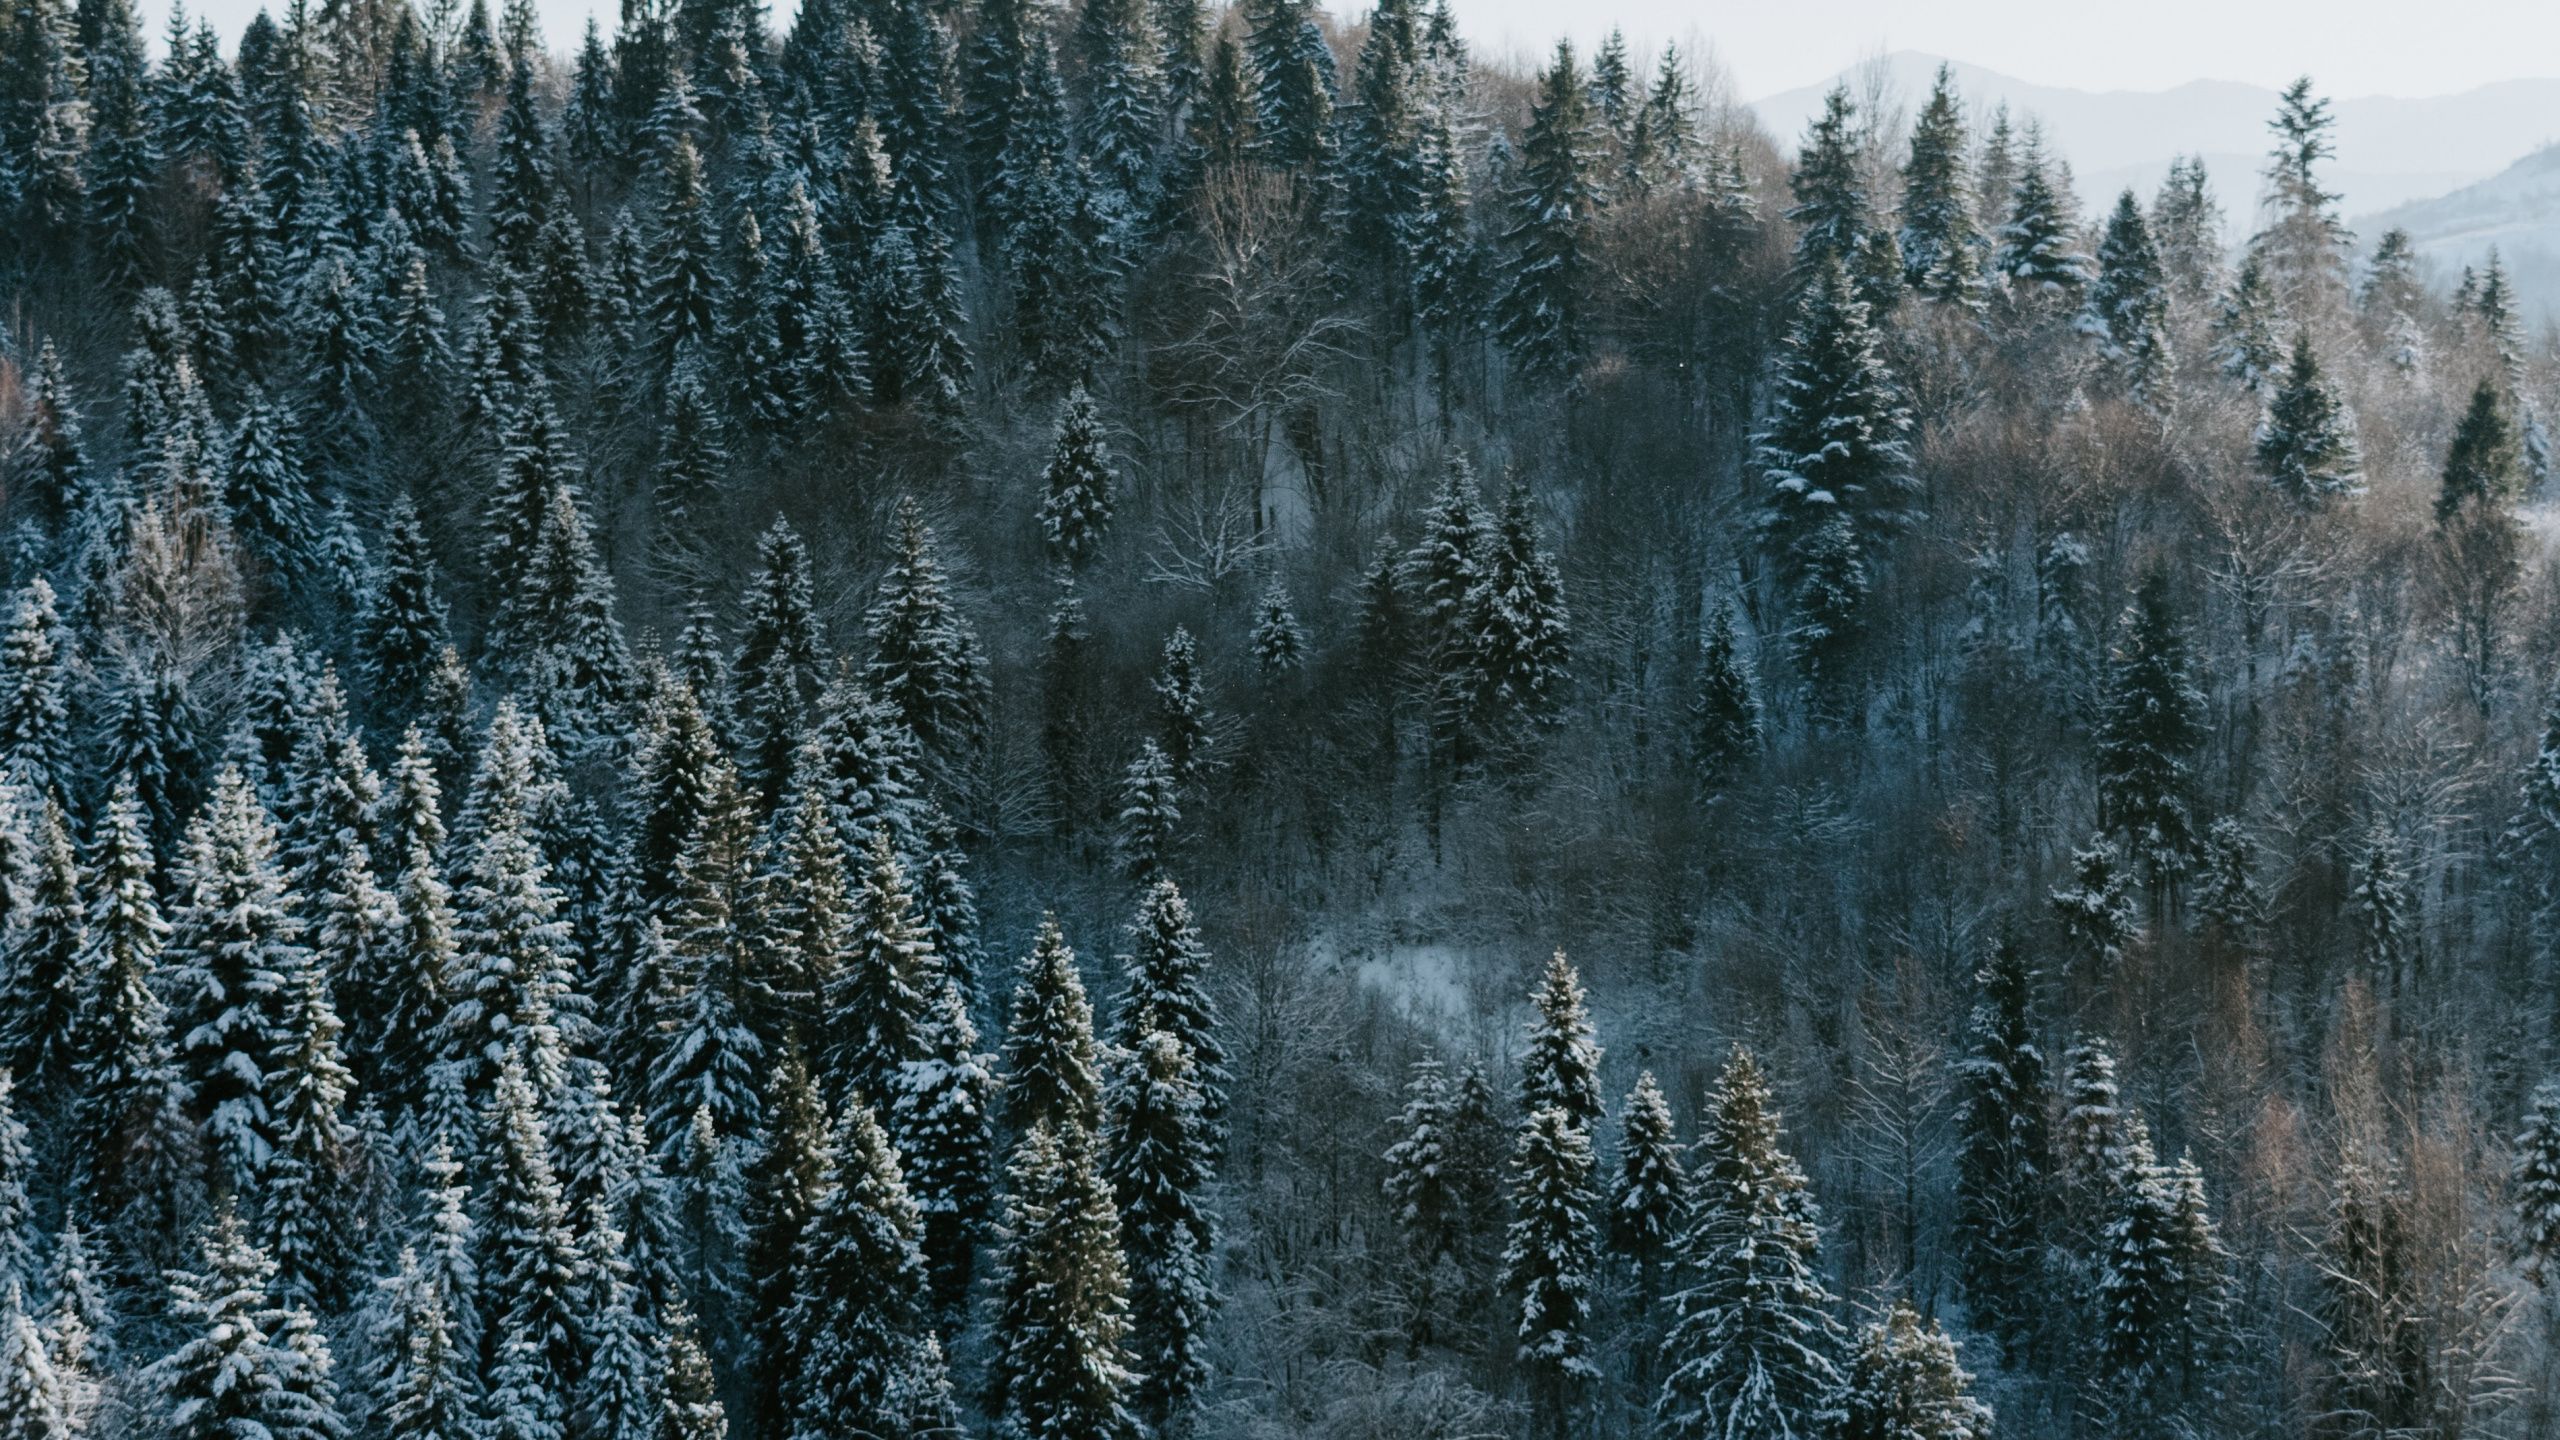 Download Pine trees, winter, nature, forest wallpaper, 2560x Dual Wide, Widescreen 16: Widescreen